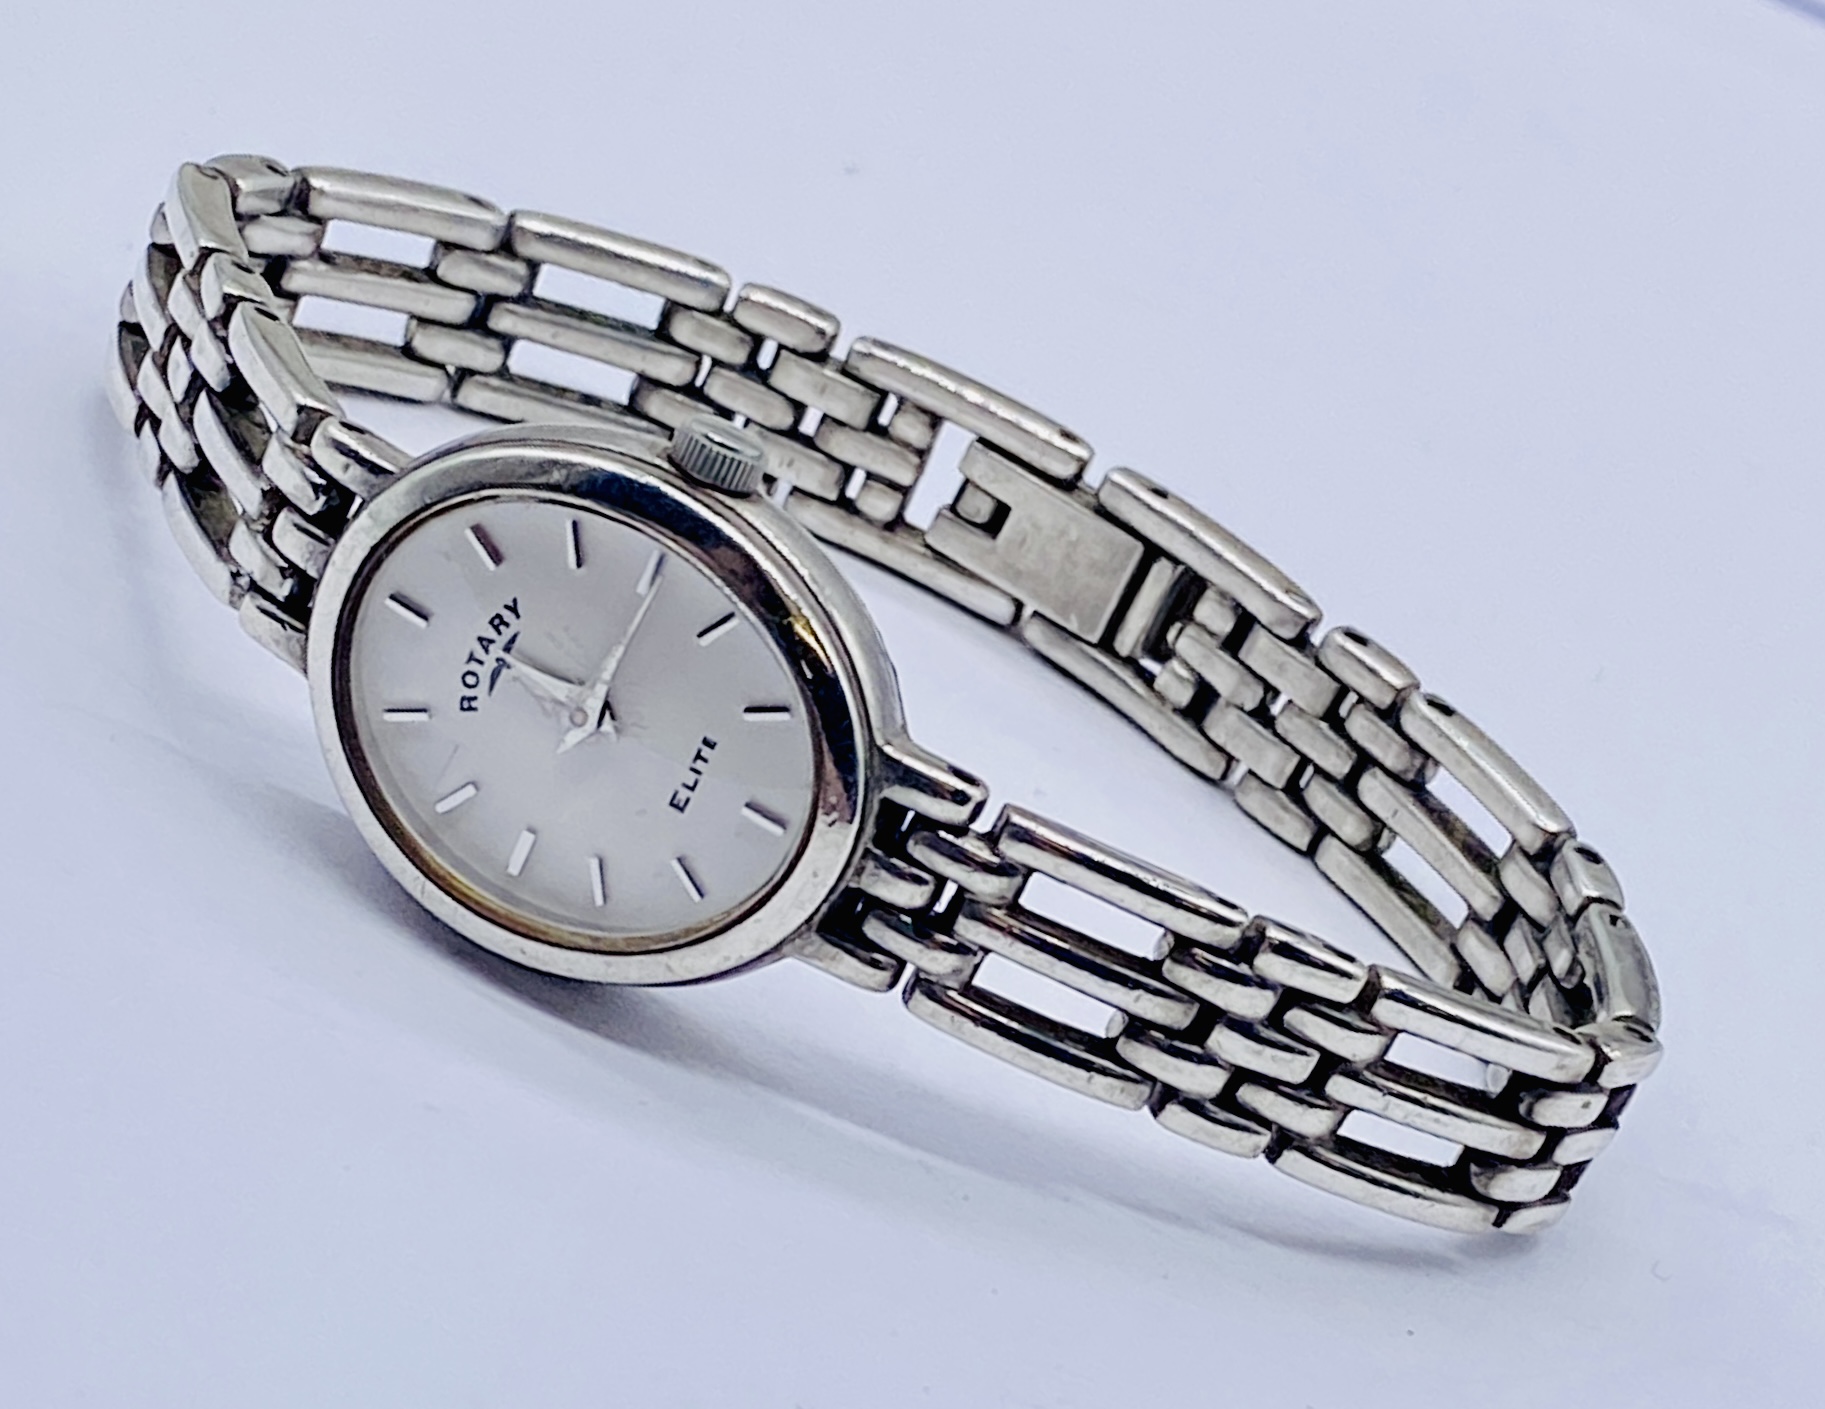 A ladies Rotary Elite Sterling silver wristwatch along with a matching bracelet - Image 2 of 3